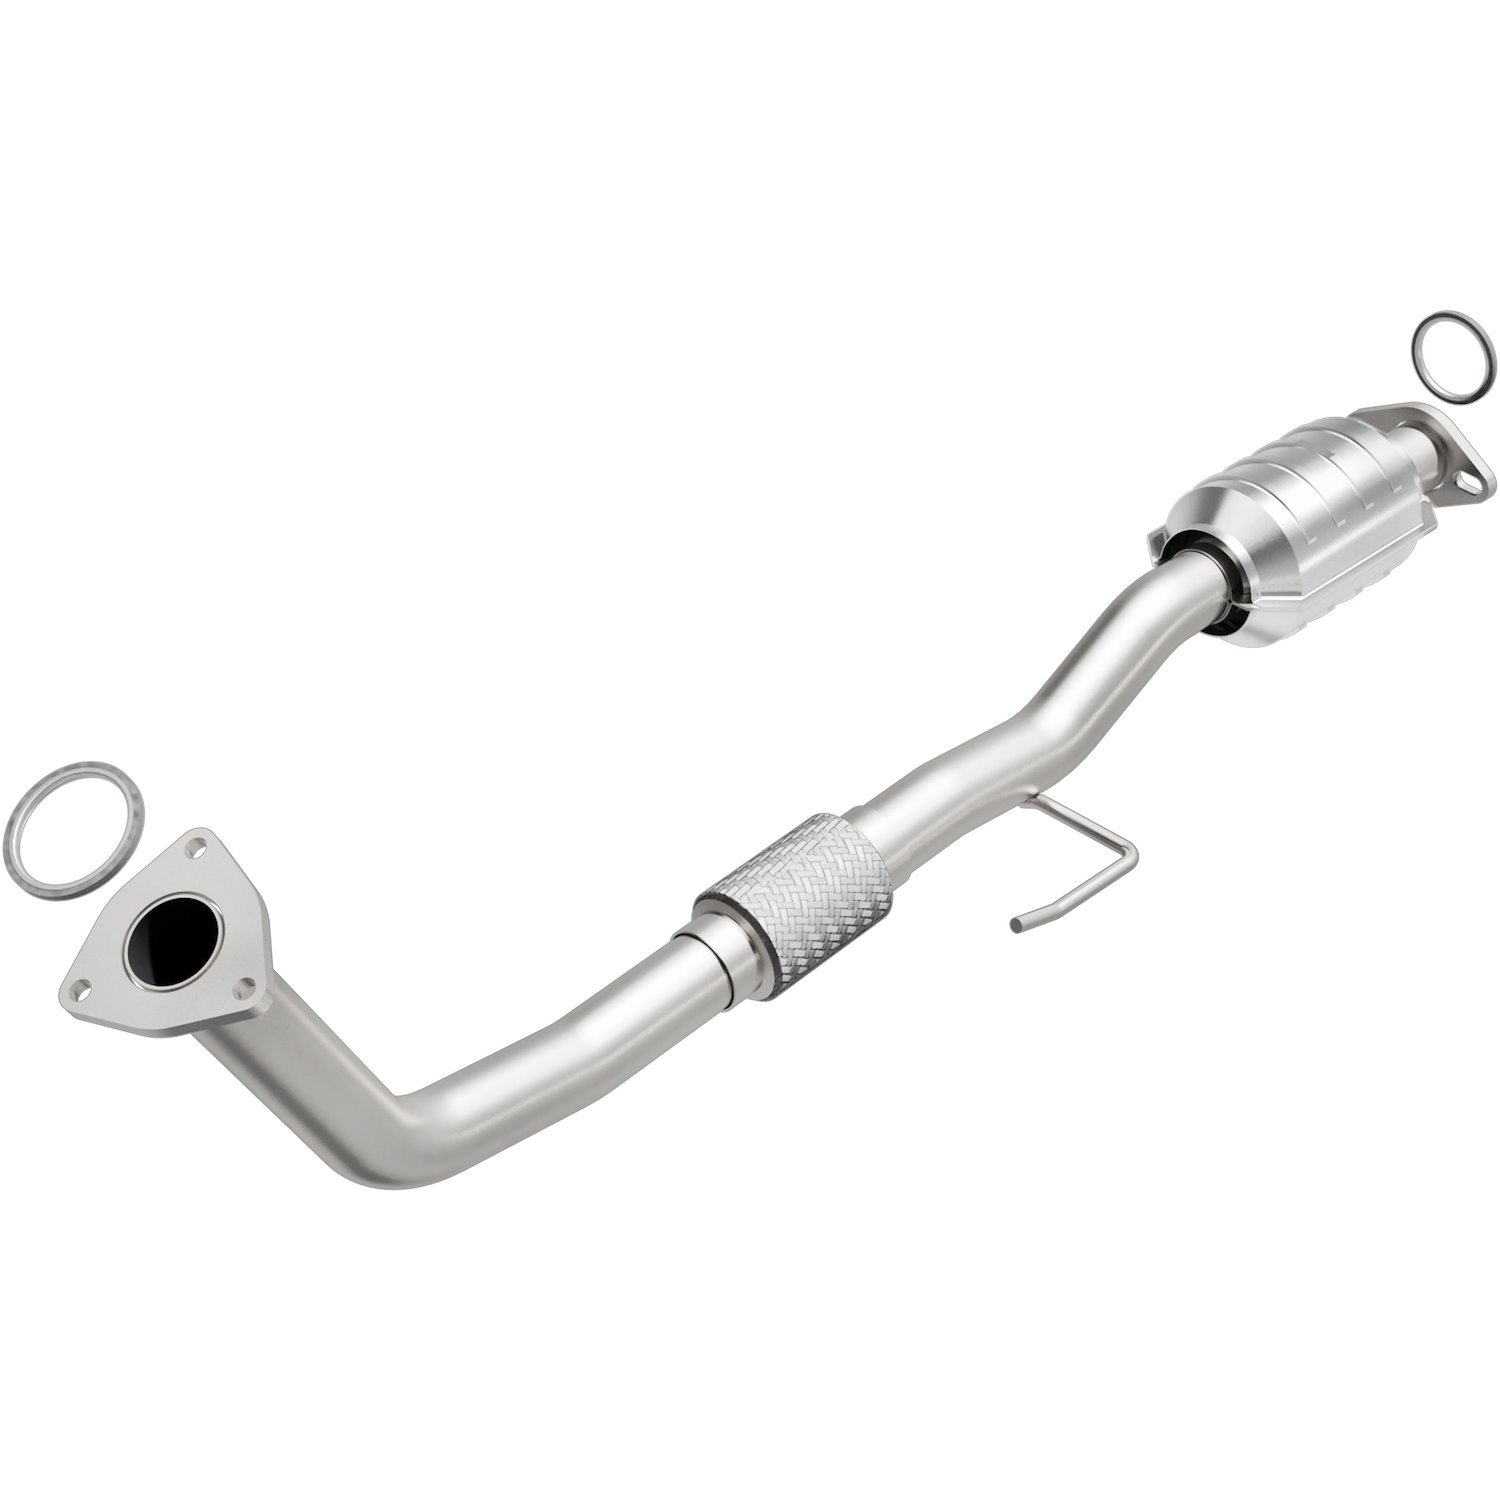 1992-1995 Toyota Camry California Grade CARB Compliant Direct-Fit Catalytic Converter